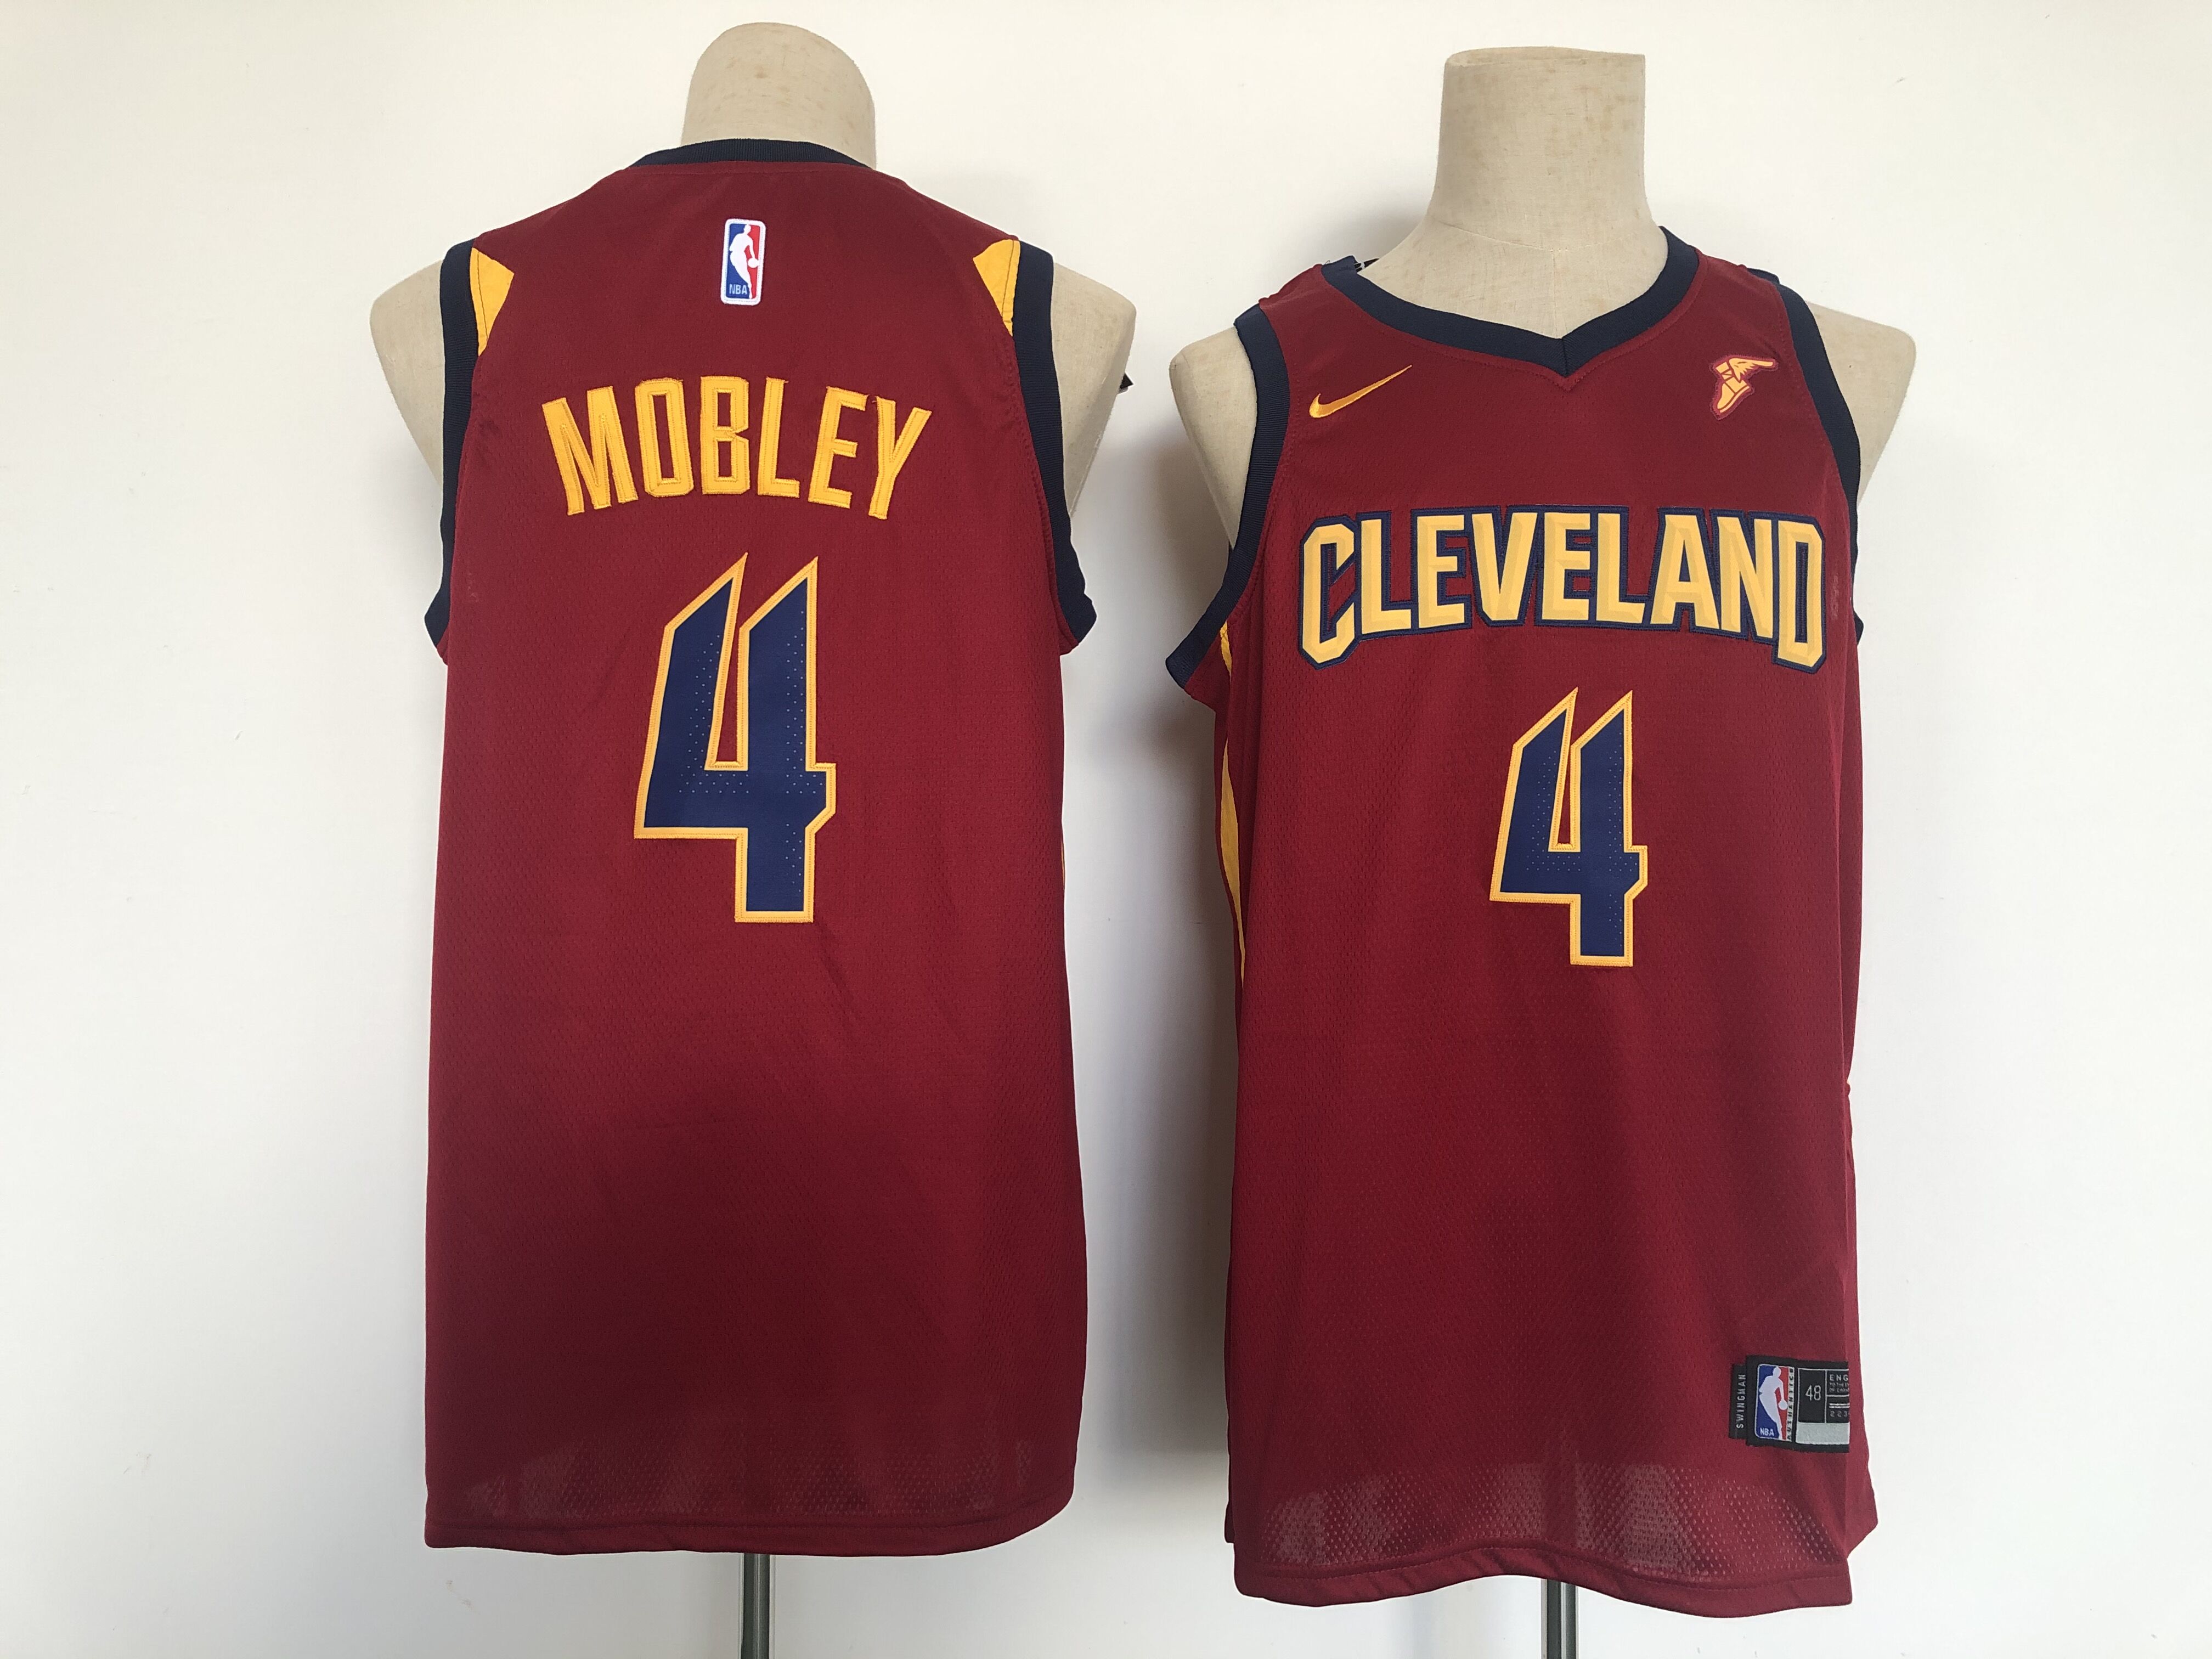 Cheap NBA Men Cleveland Cavaliers 4 Mobley red jersey